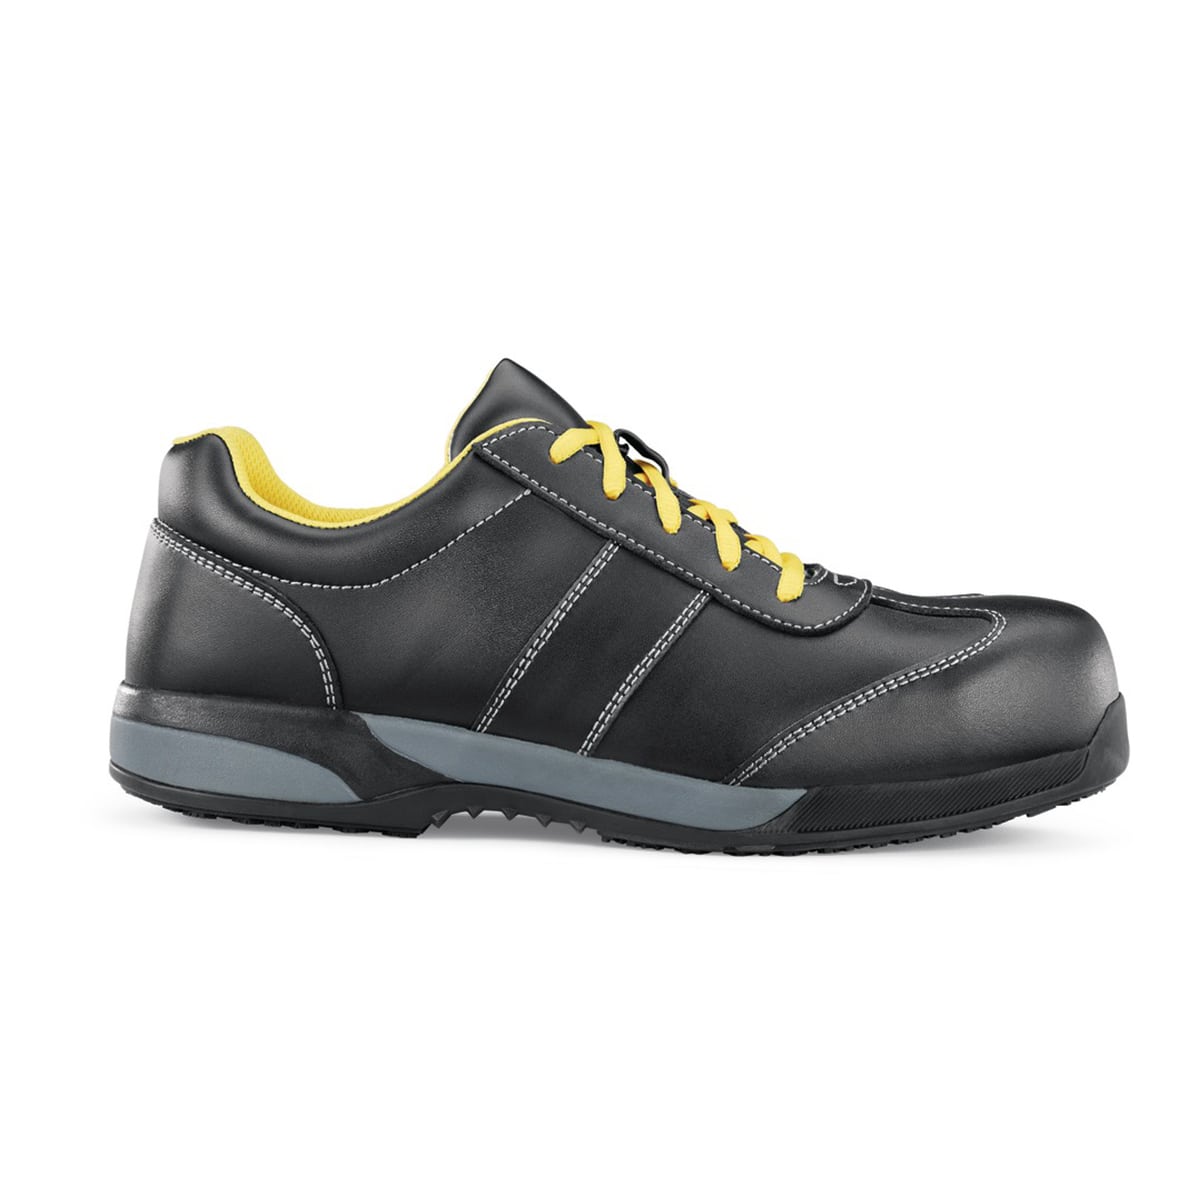 The Clyde from Shoes For Crews is a safety shoe with a slip-resistant sole, a waterproof and puncture-resistant upper and a nanocomposite toe cap (200 joules), seen from the right.